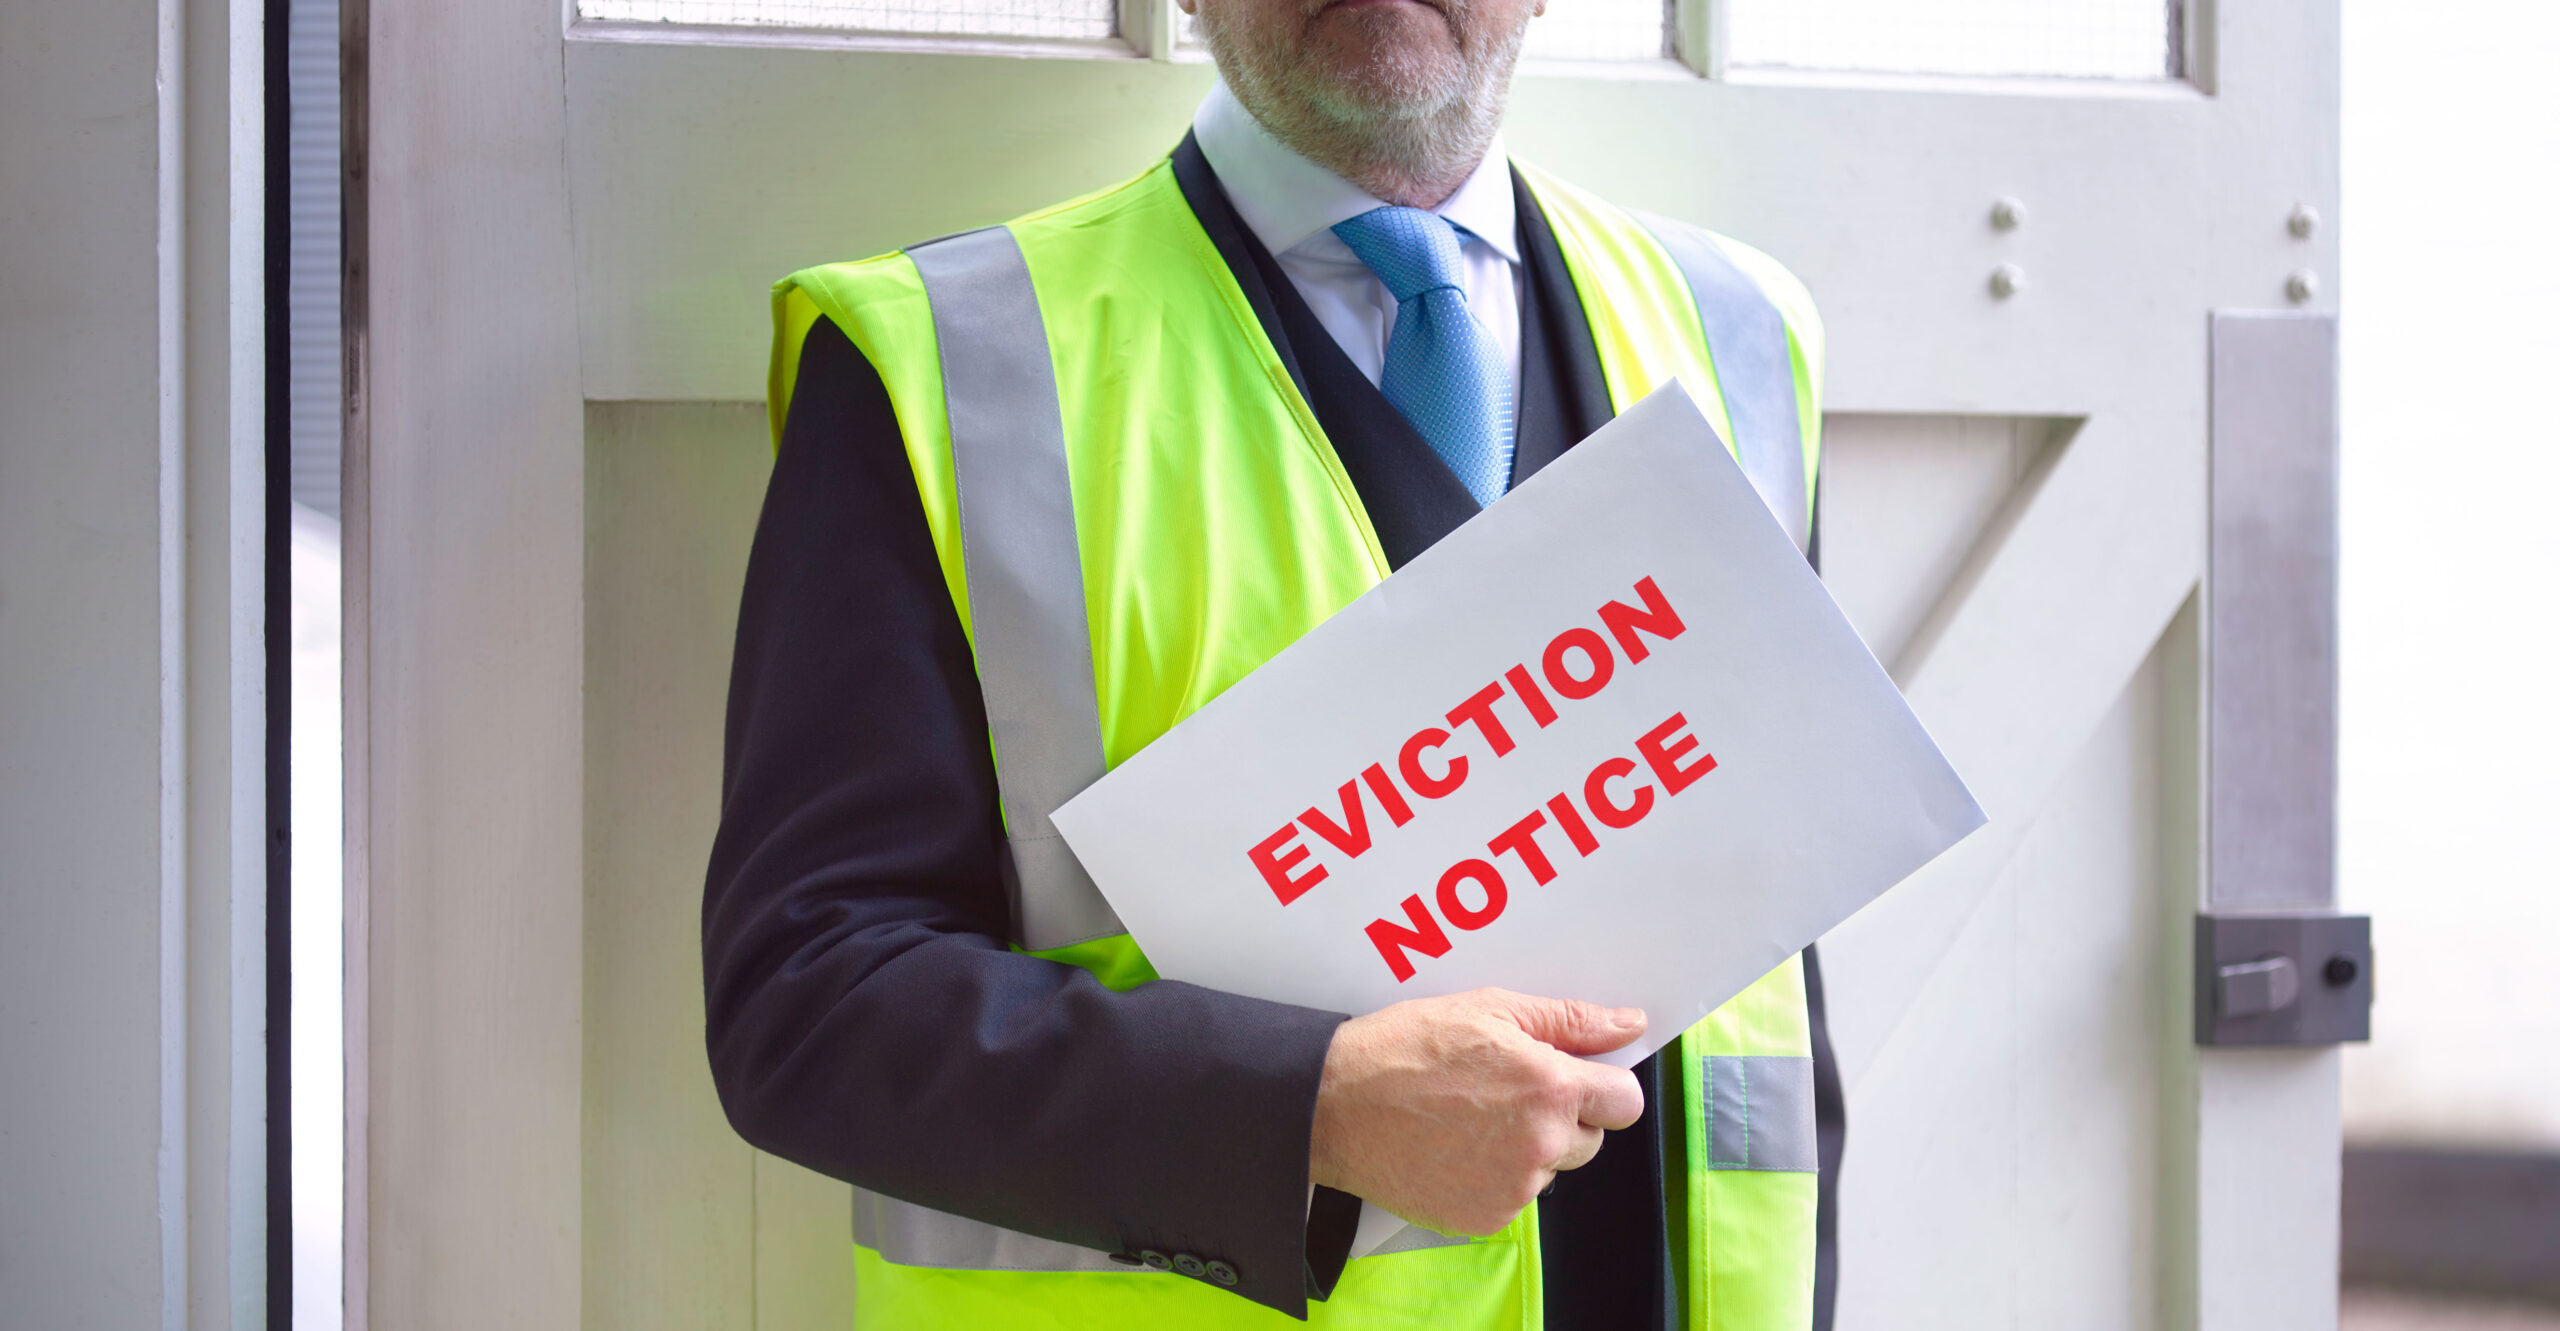 Government Policies Are Exacerbating Evictions